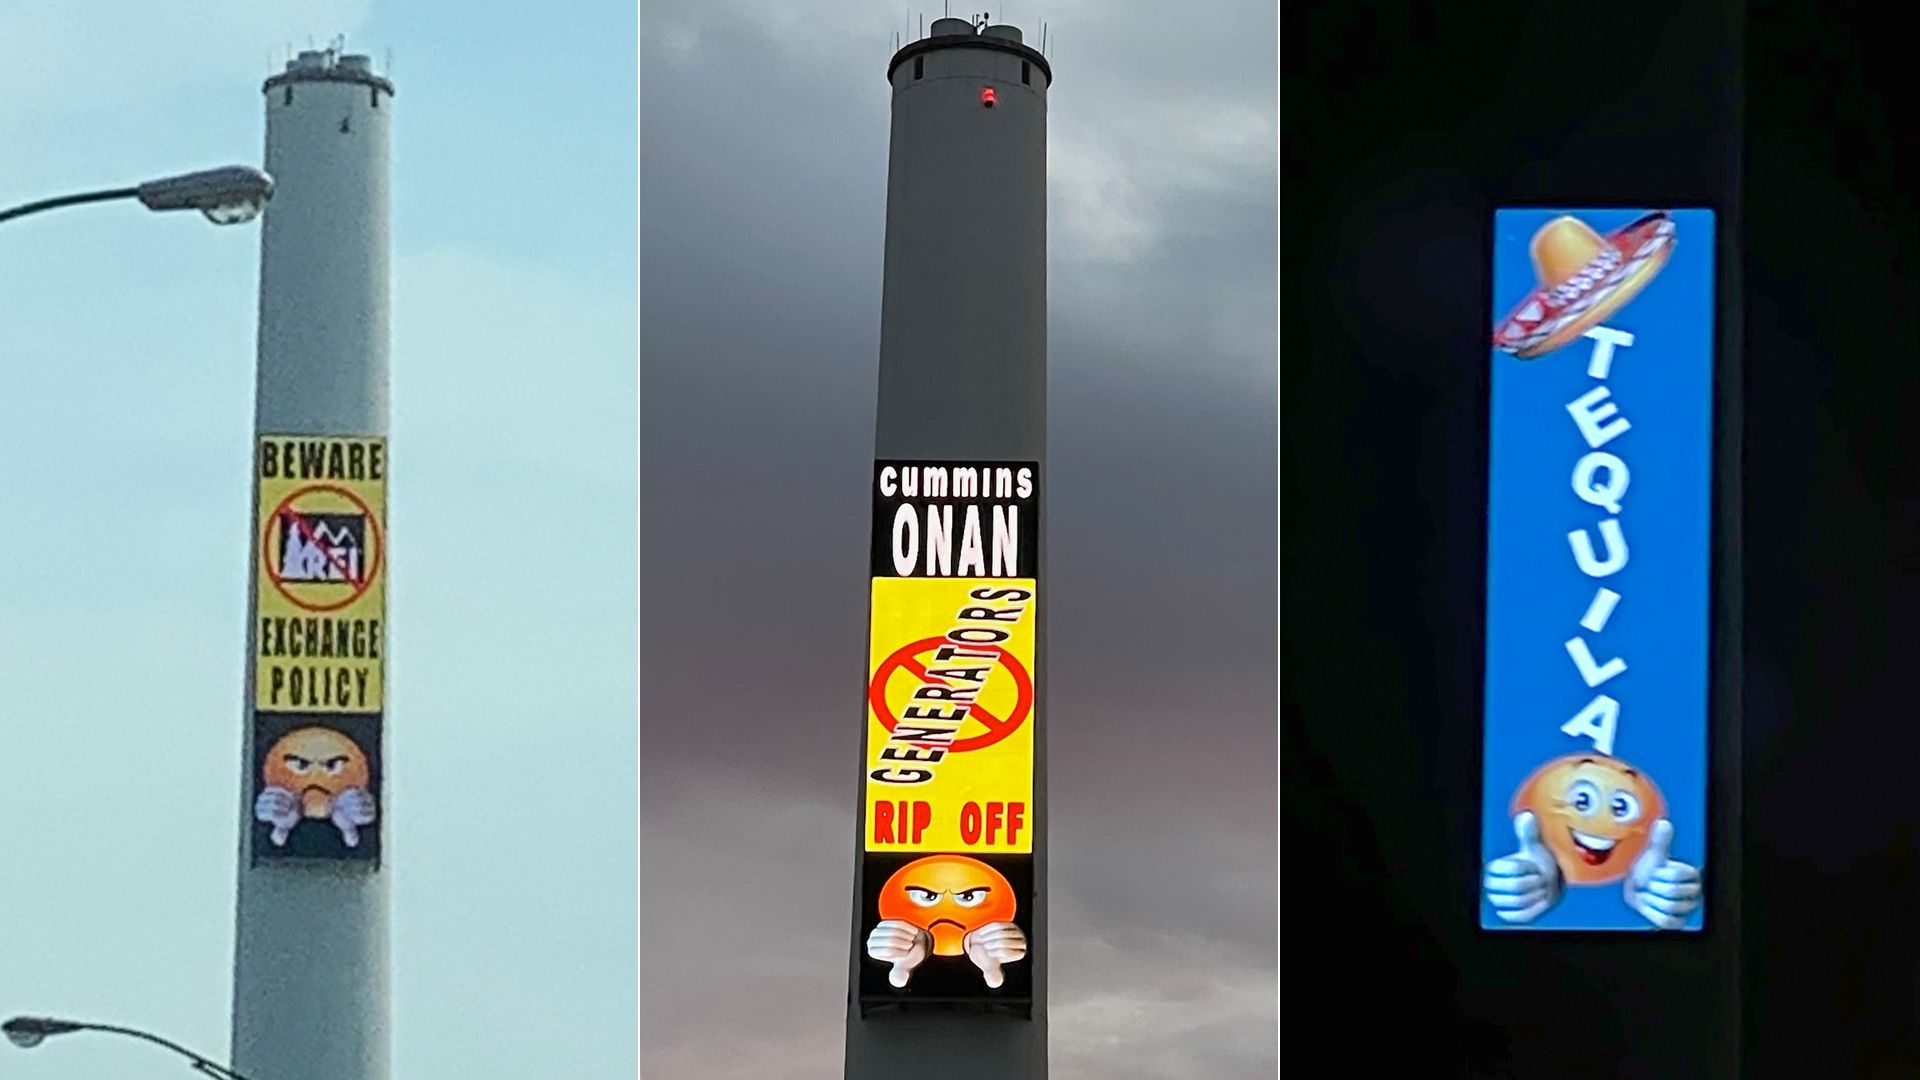 A trio of images of a chimney and video screen with complaints about company products and policies and a sign exclaiming "tequila"